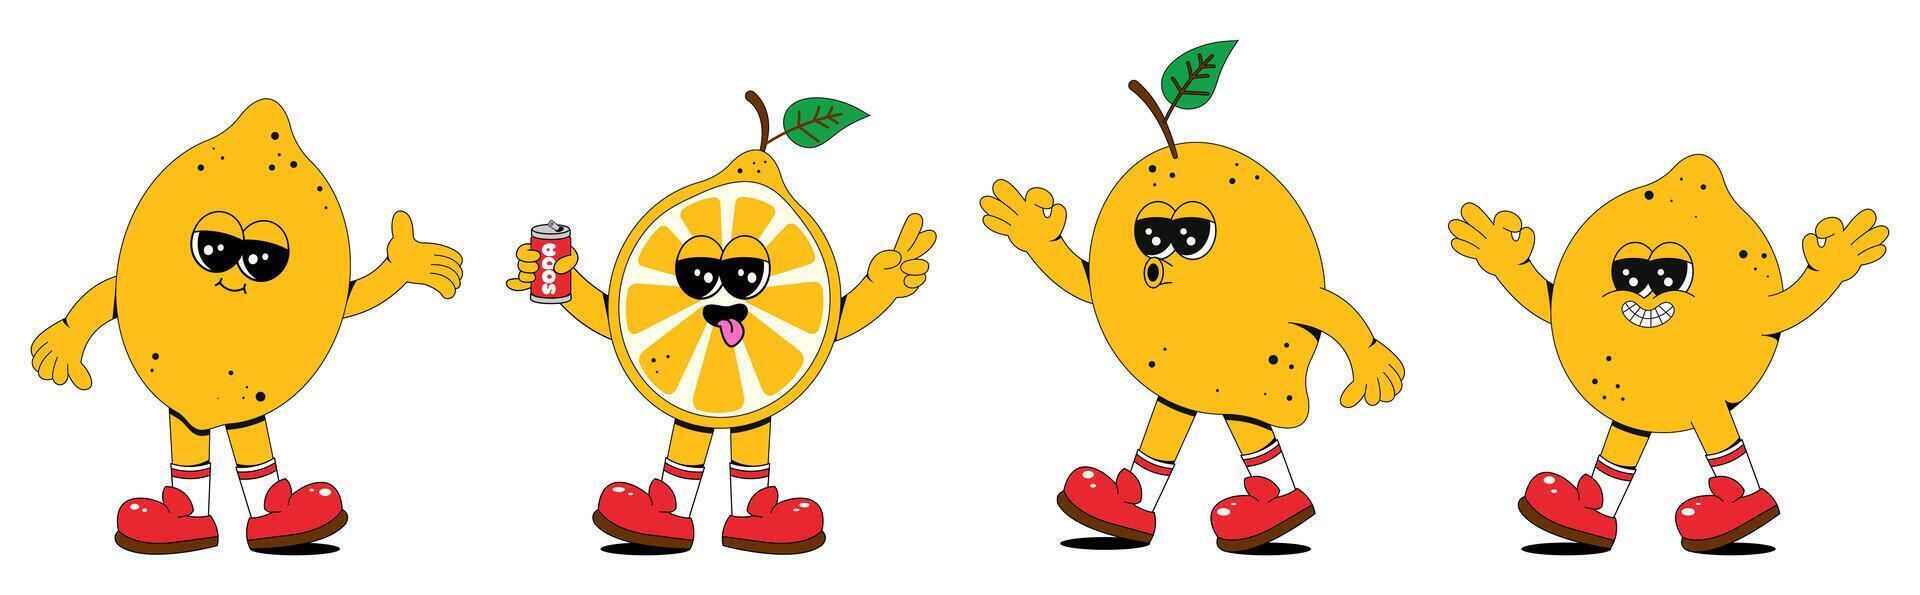 Set of retro cartoon lemon fruit characters. A modern illustration featuring cute lemon mascots in different poses and emotions, creating a 70's comic book vibe. vector